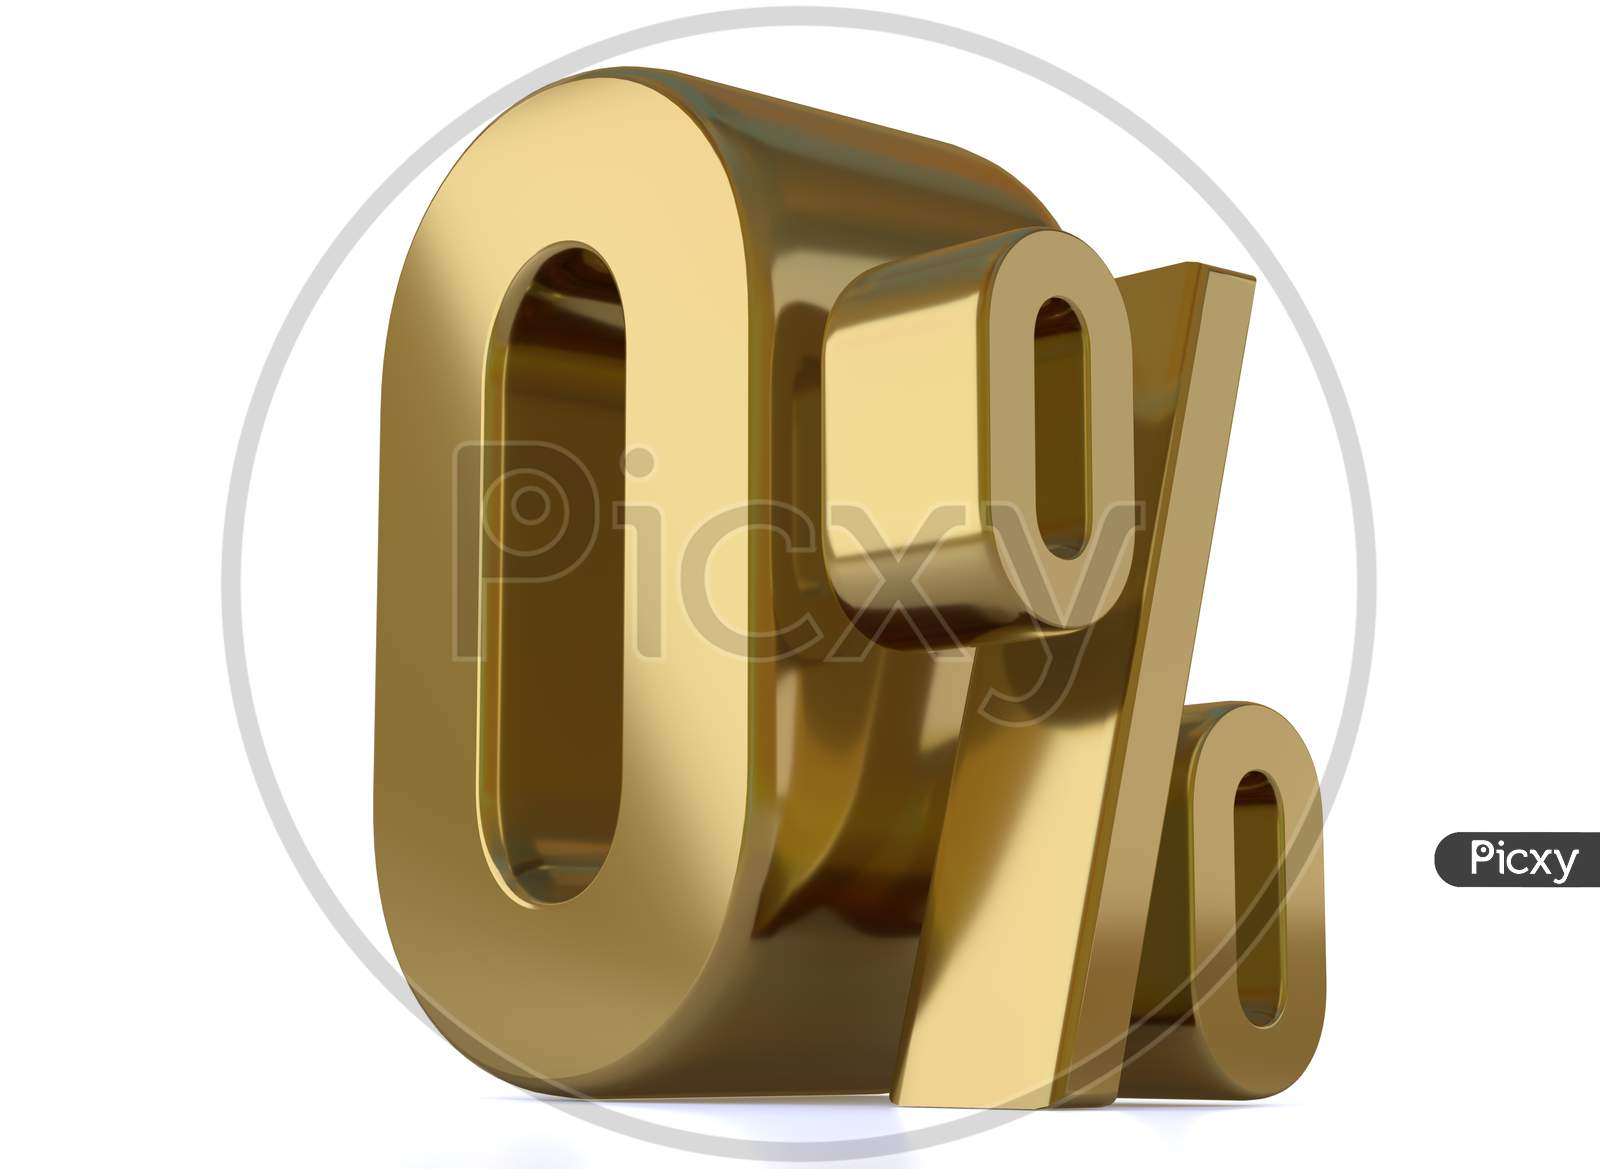 0% 3d illustration. Gold zero percent special Offer on white background